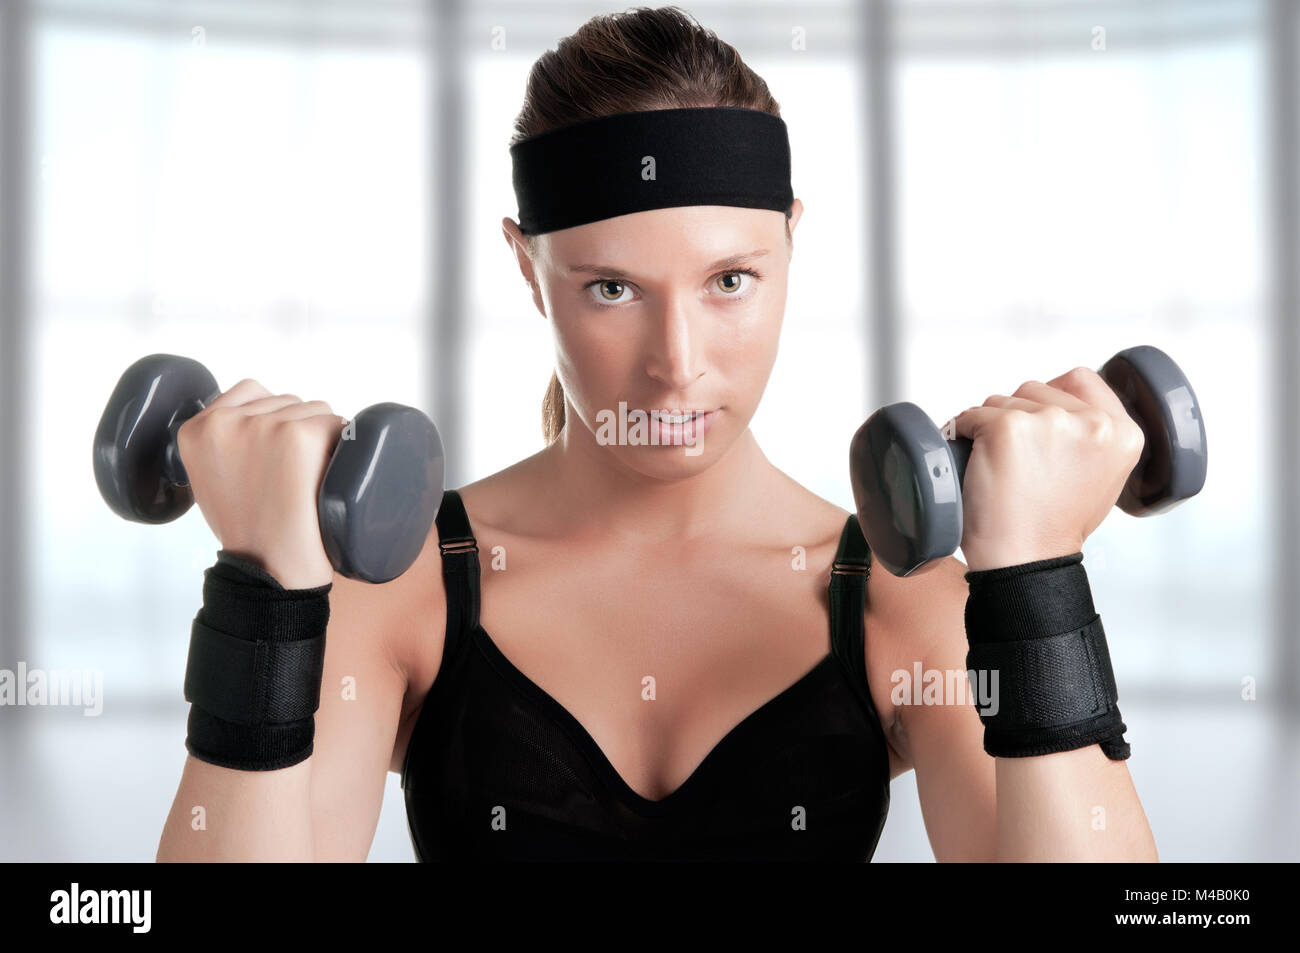 Woman Working Out Stock Photo